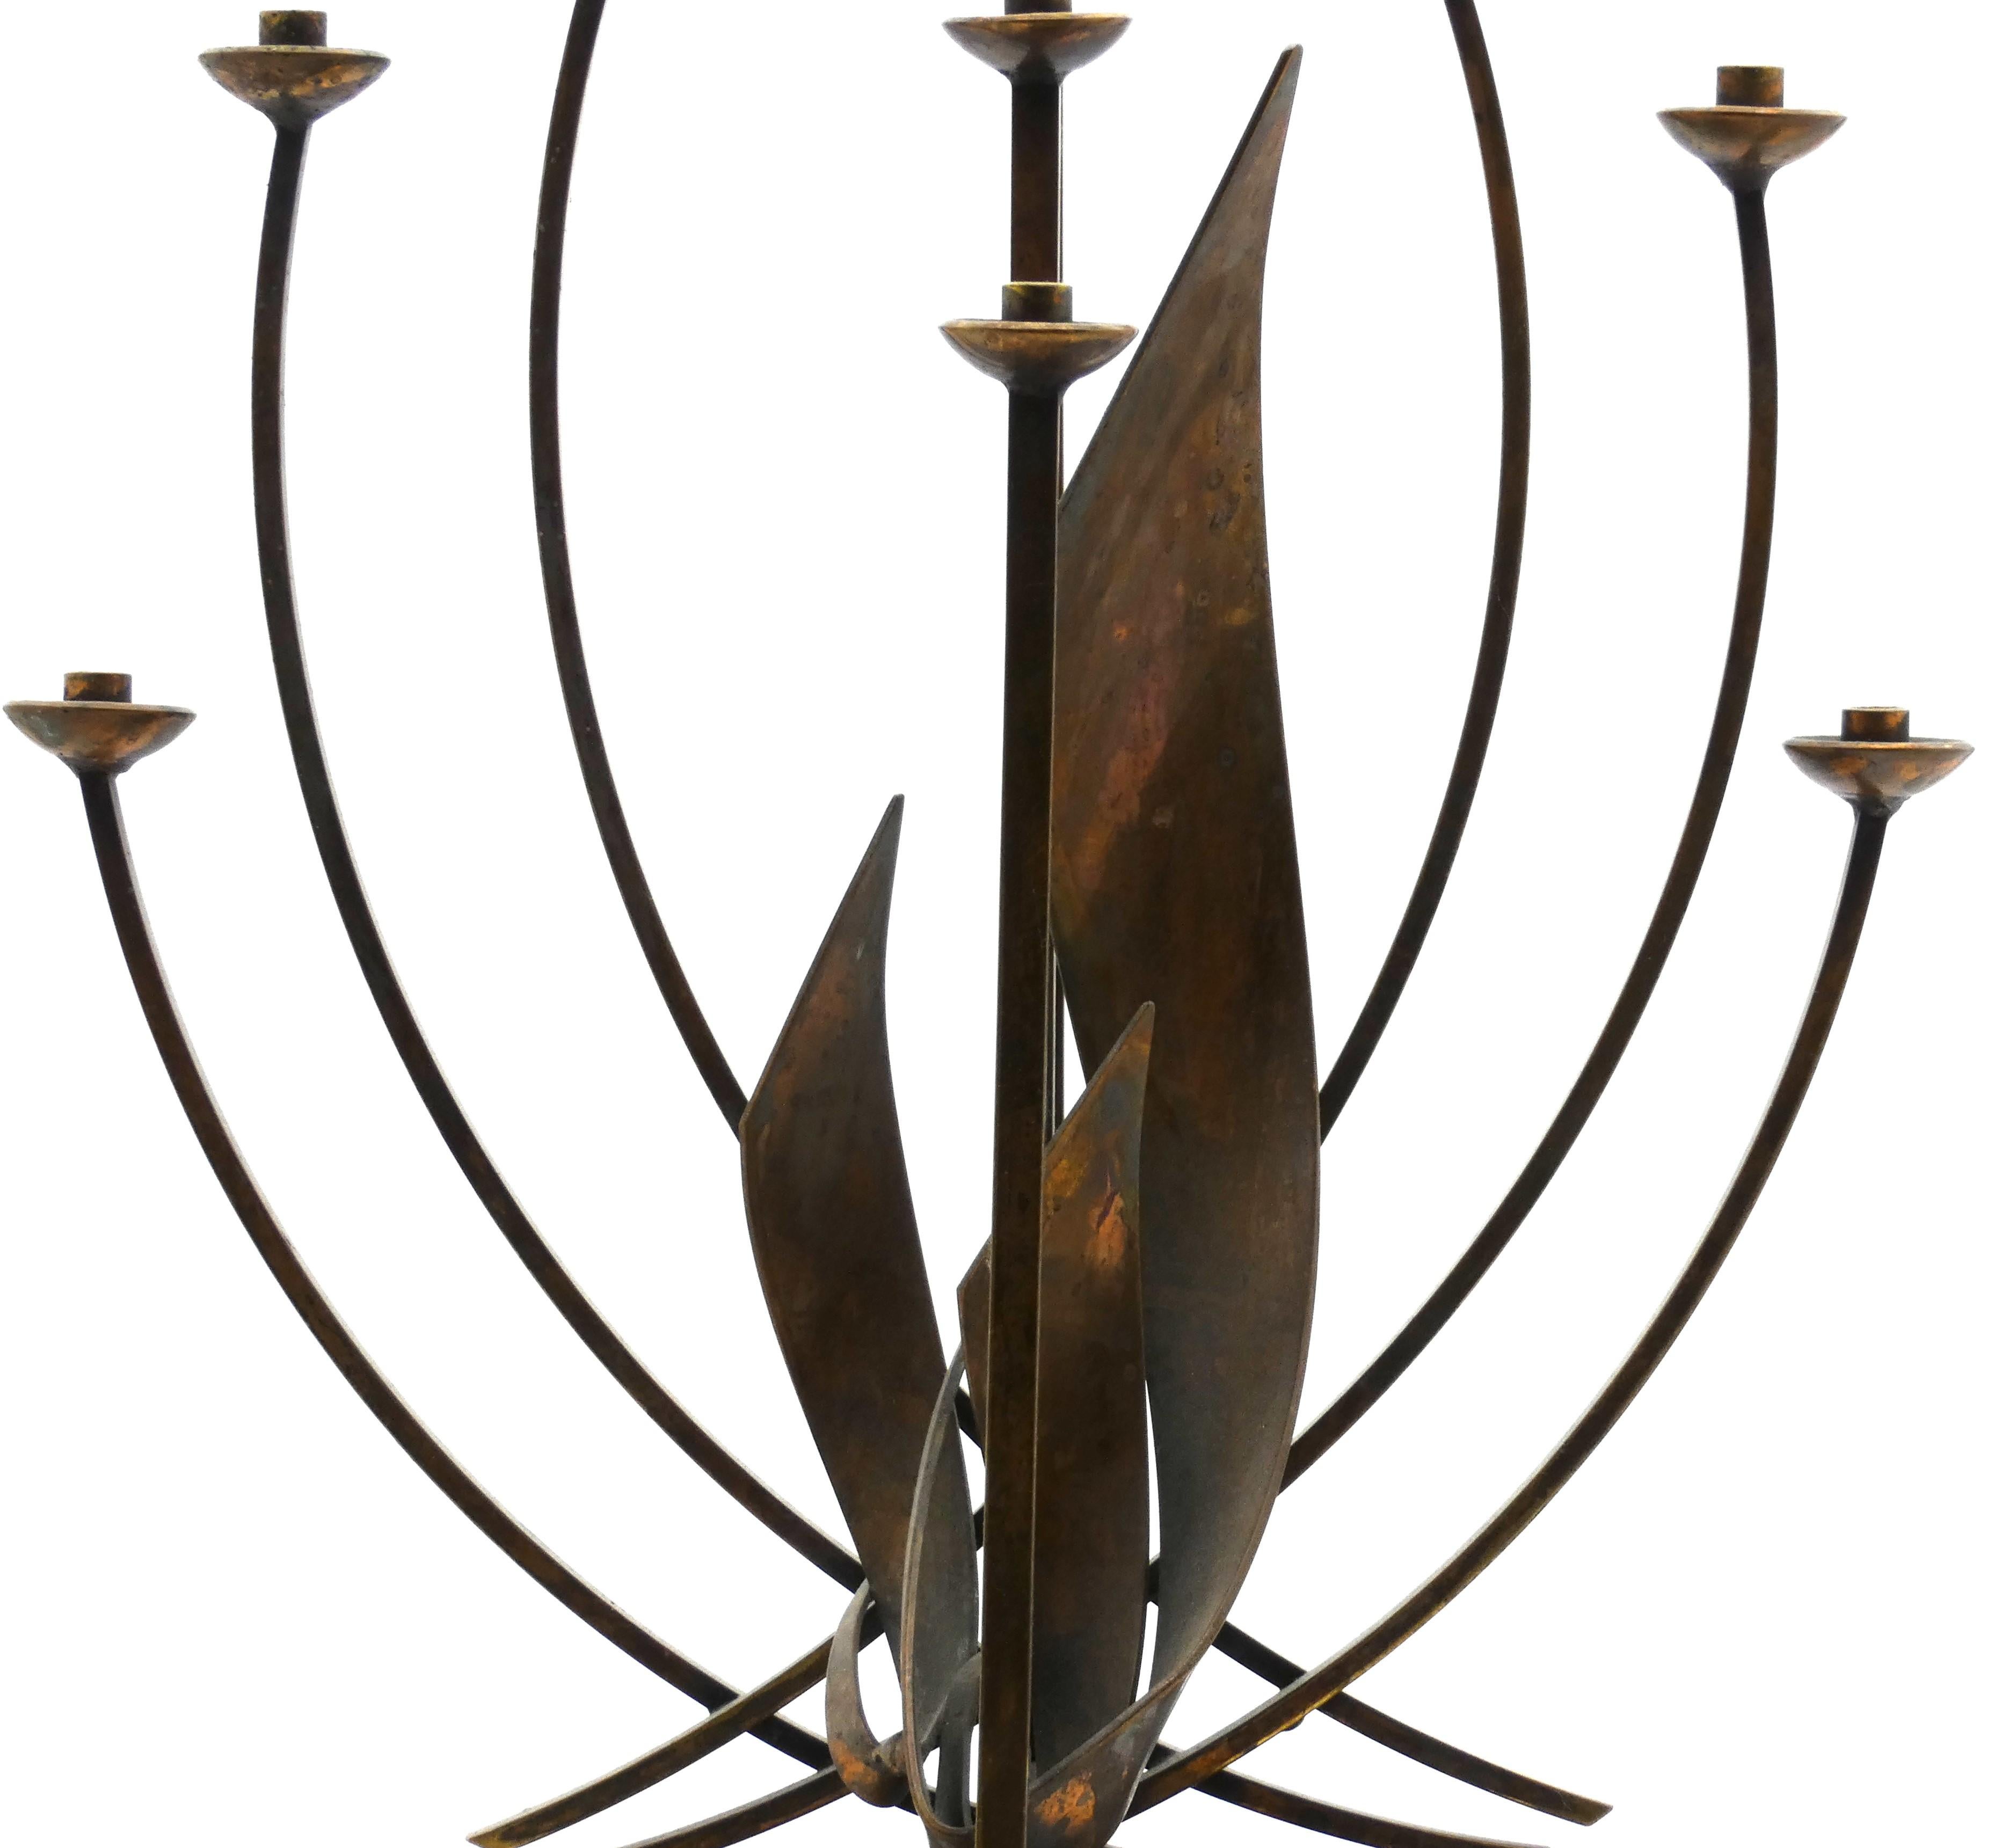 Modern brass Hanukkah Menorah designed by Maxwell Chayat mounted on a wooden block.

Classic modern style of artistry which was known to be Chayat's signature method of designing Hanukah lamps and candlesticks. 

The first thing you notice is the